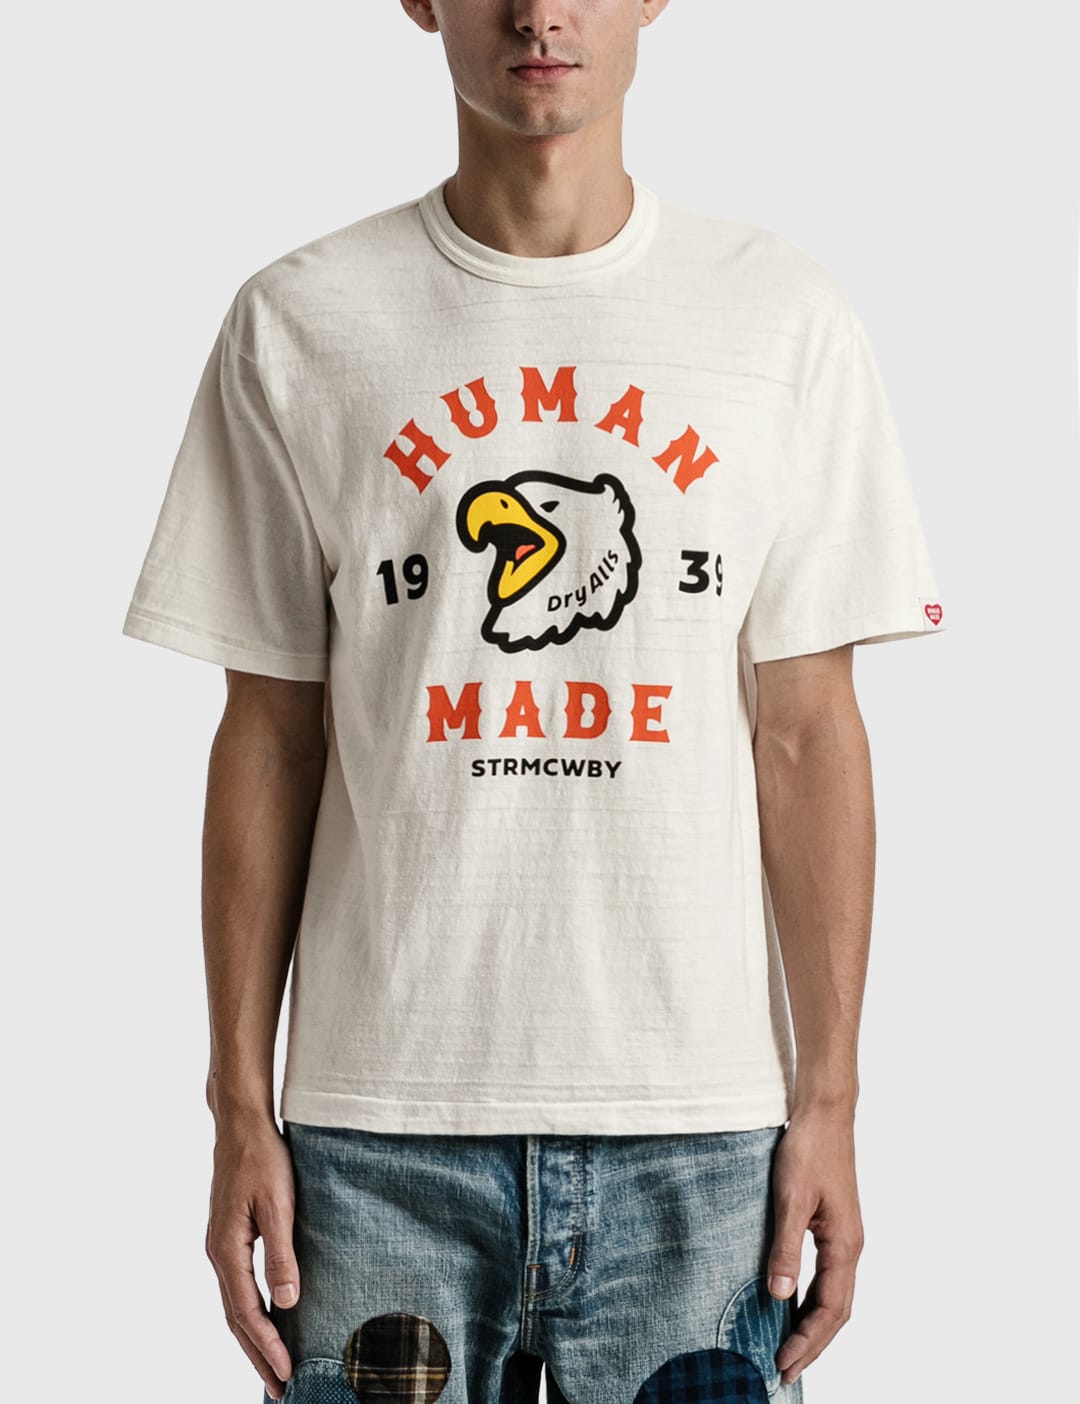 Human Made - Graphic T-shirt #7 | HBX - Globally Curated Fashion 